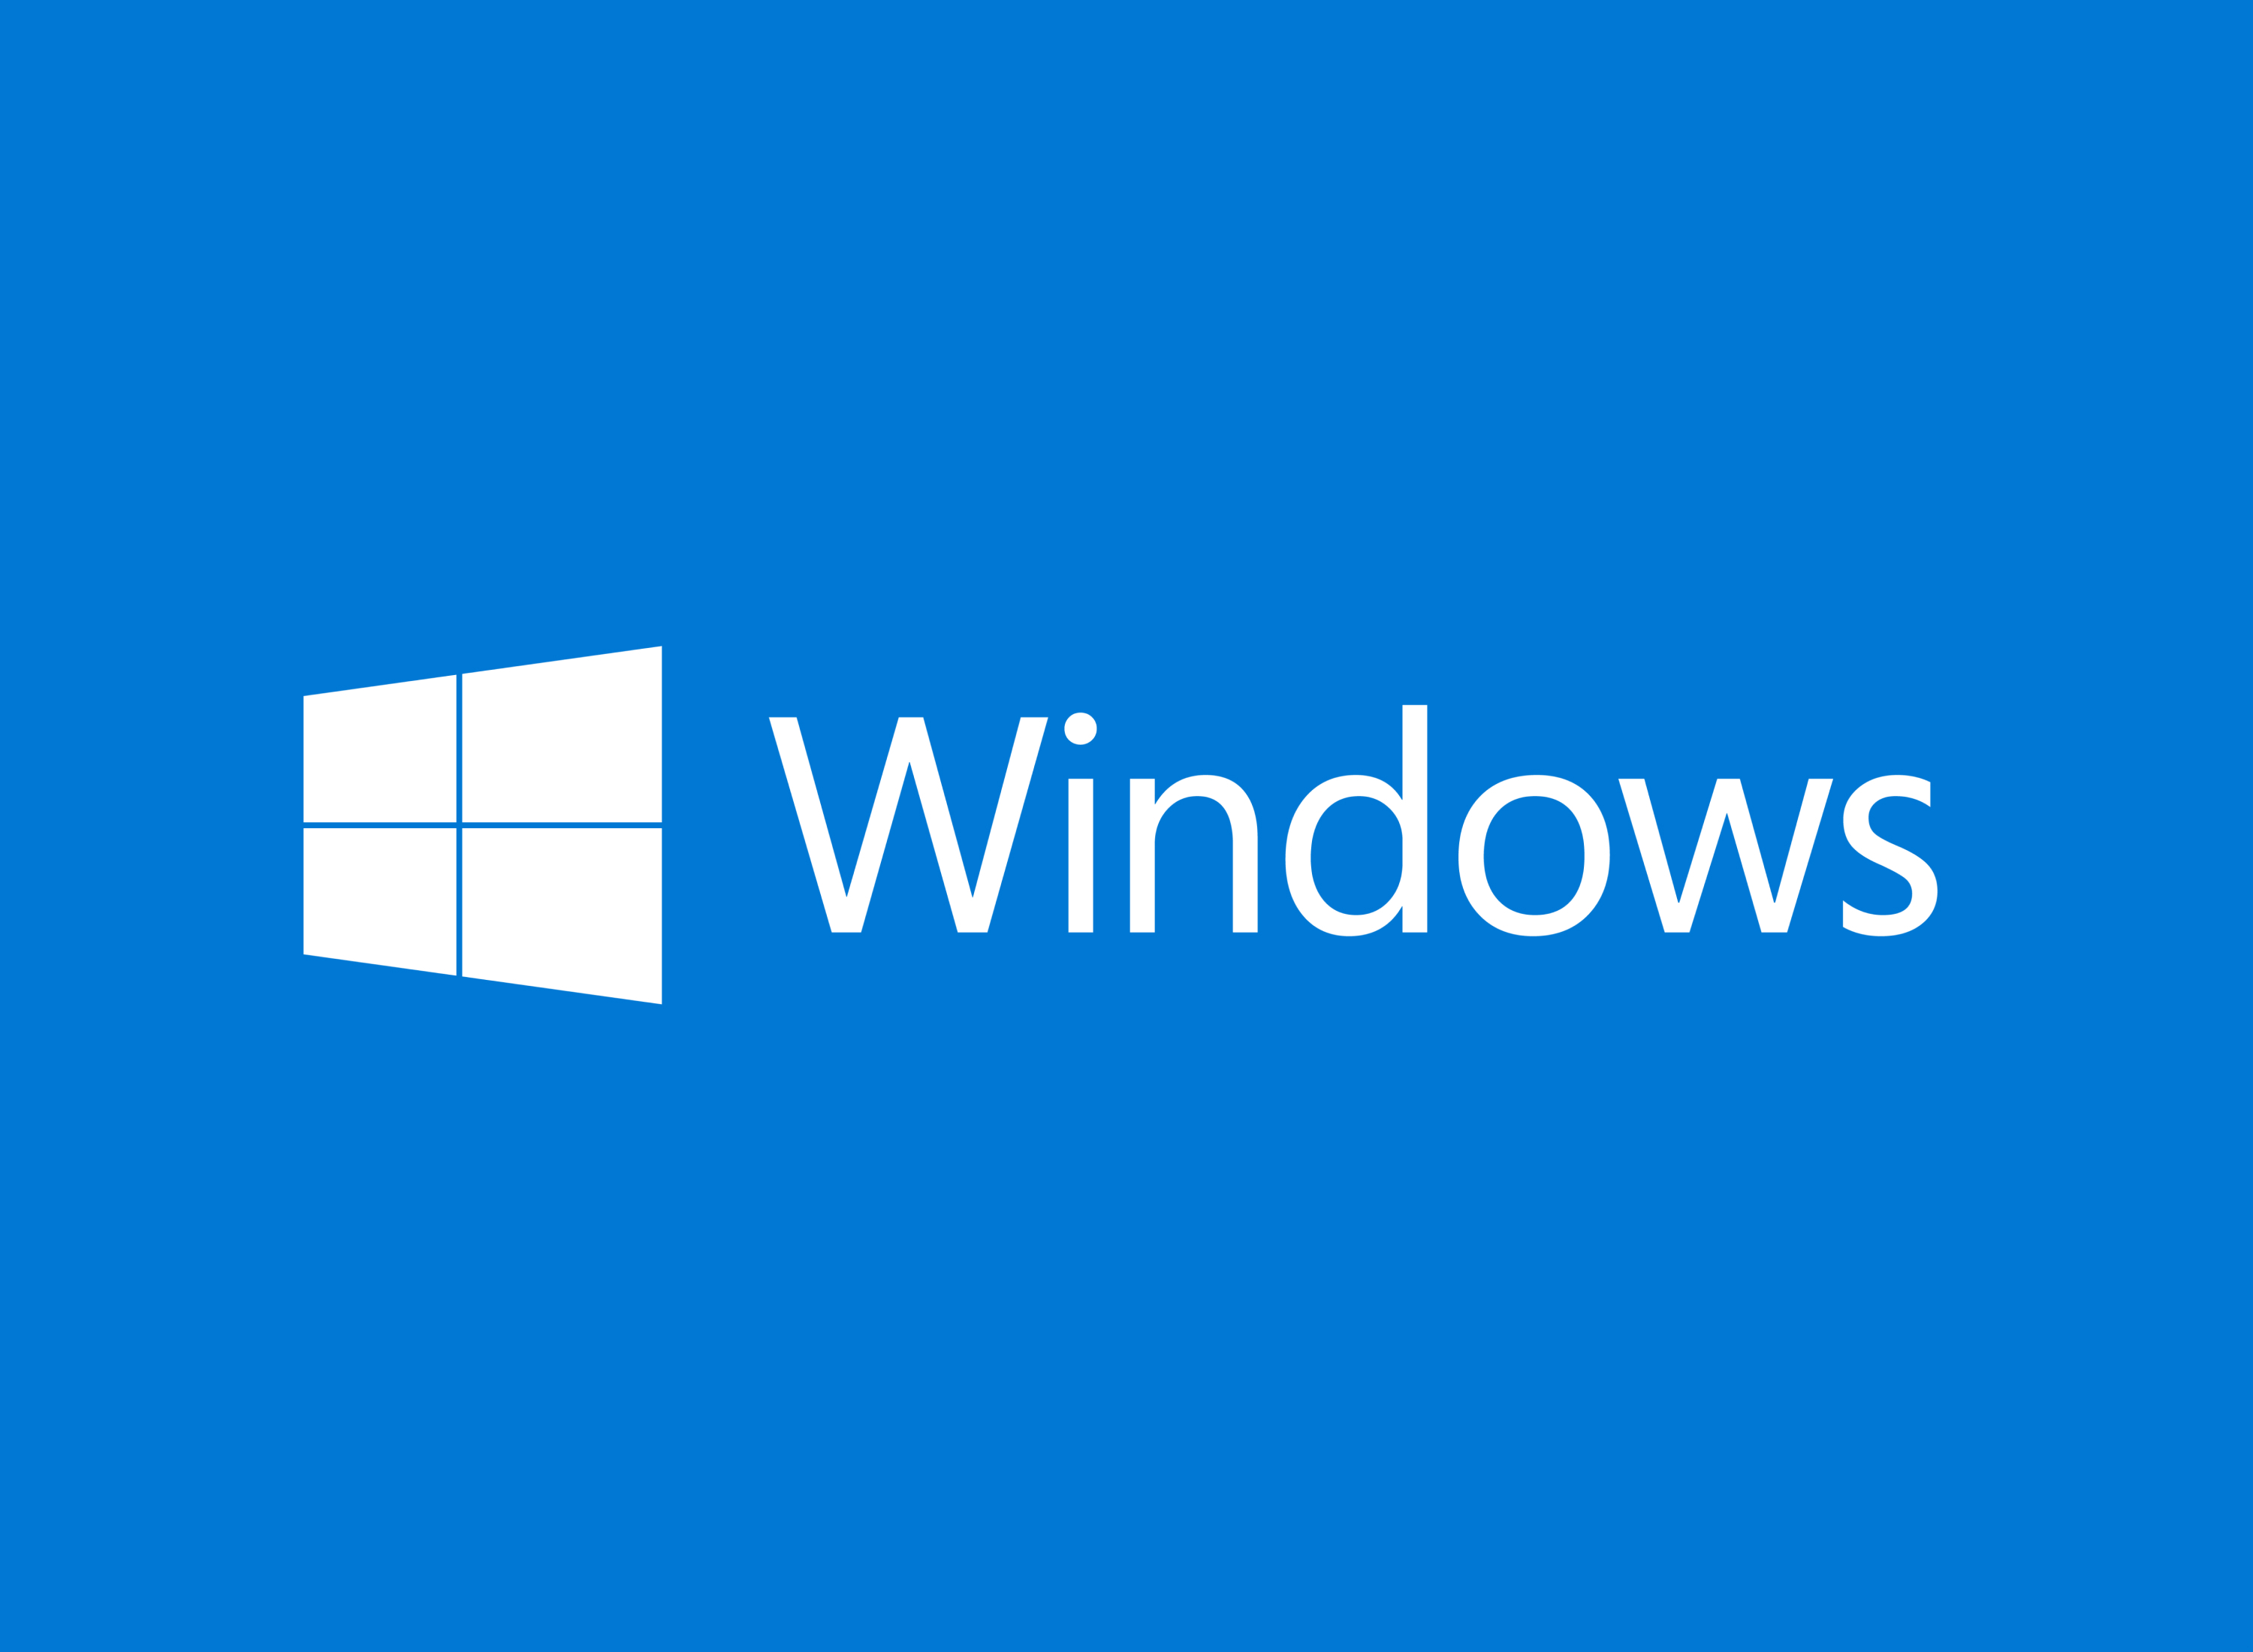 Announcing Windows 10 Insider Preview Build 21322